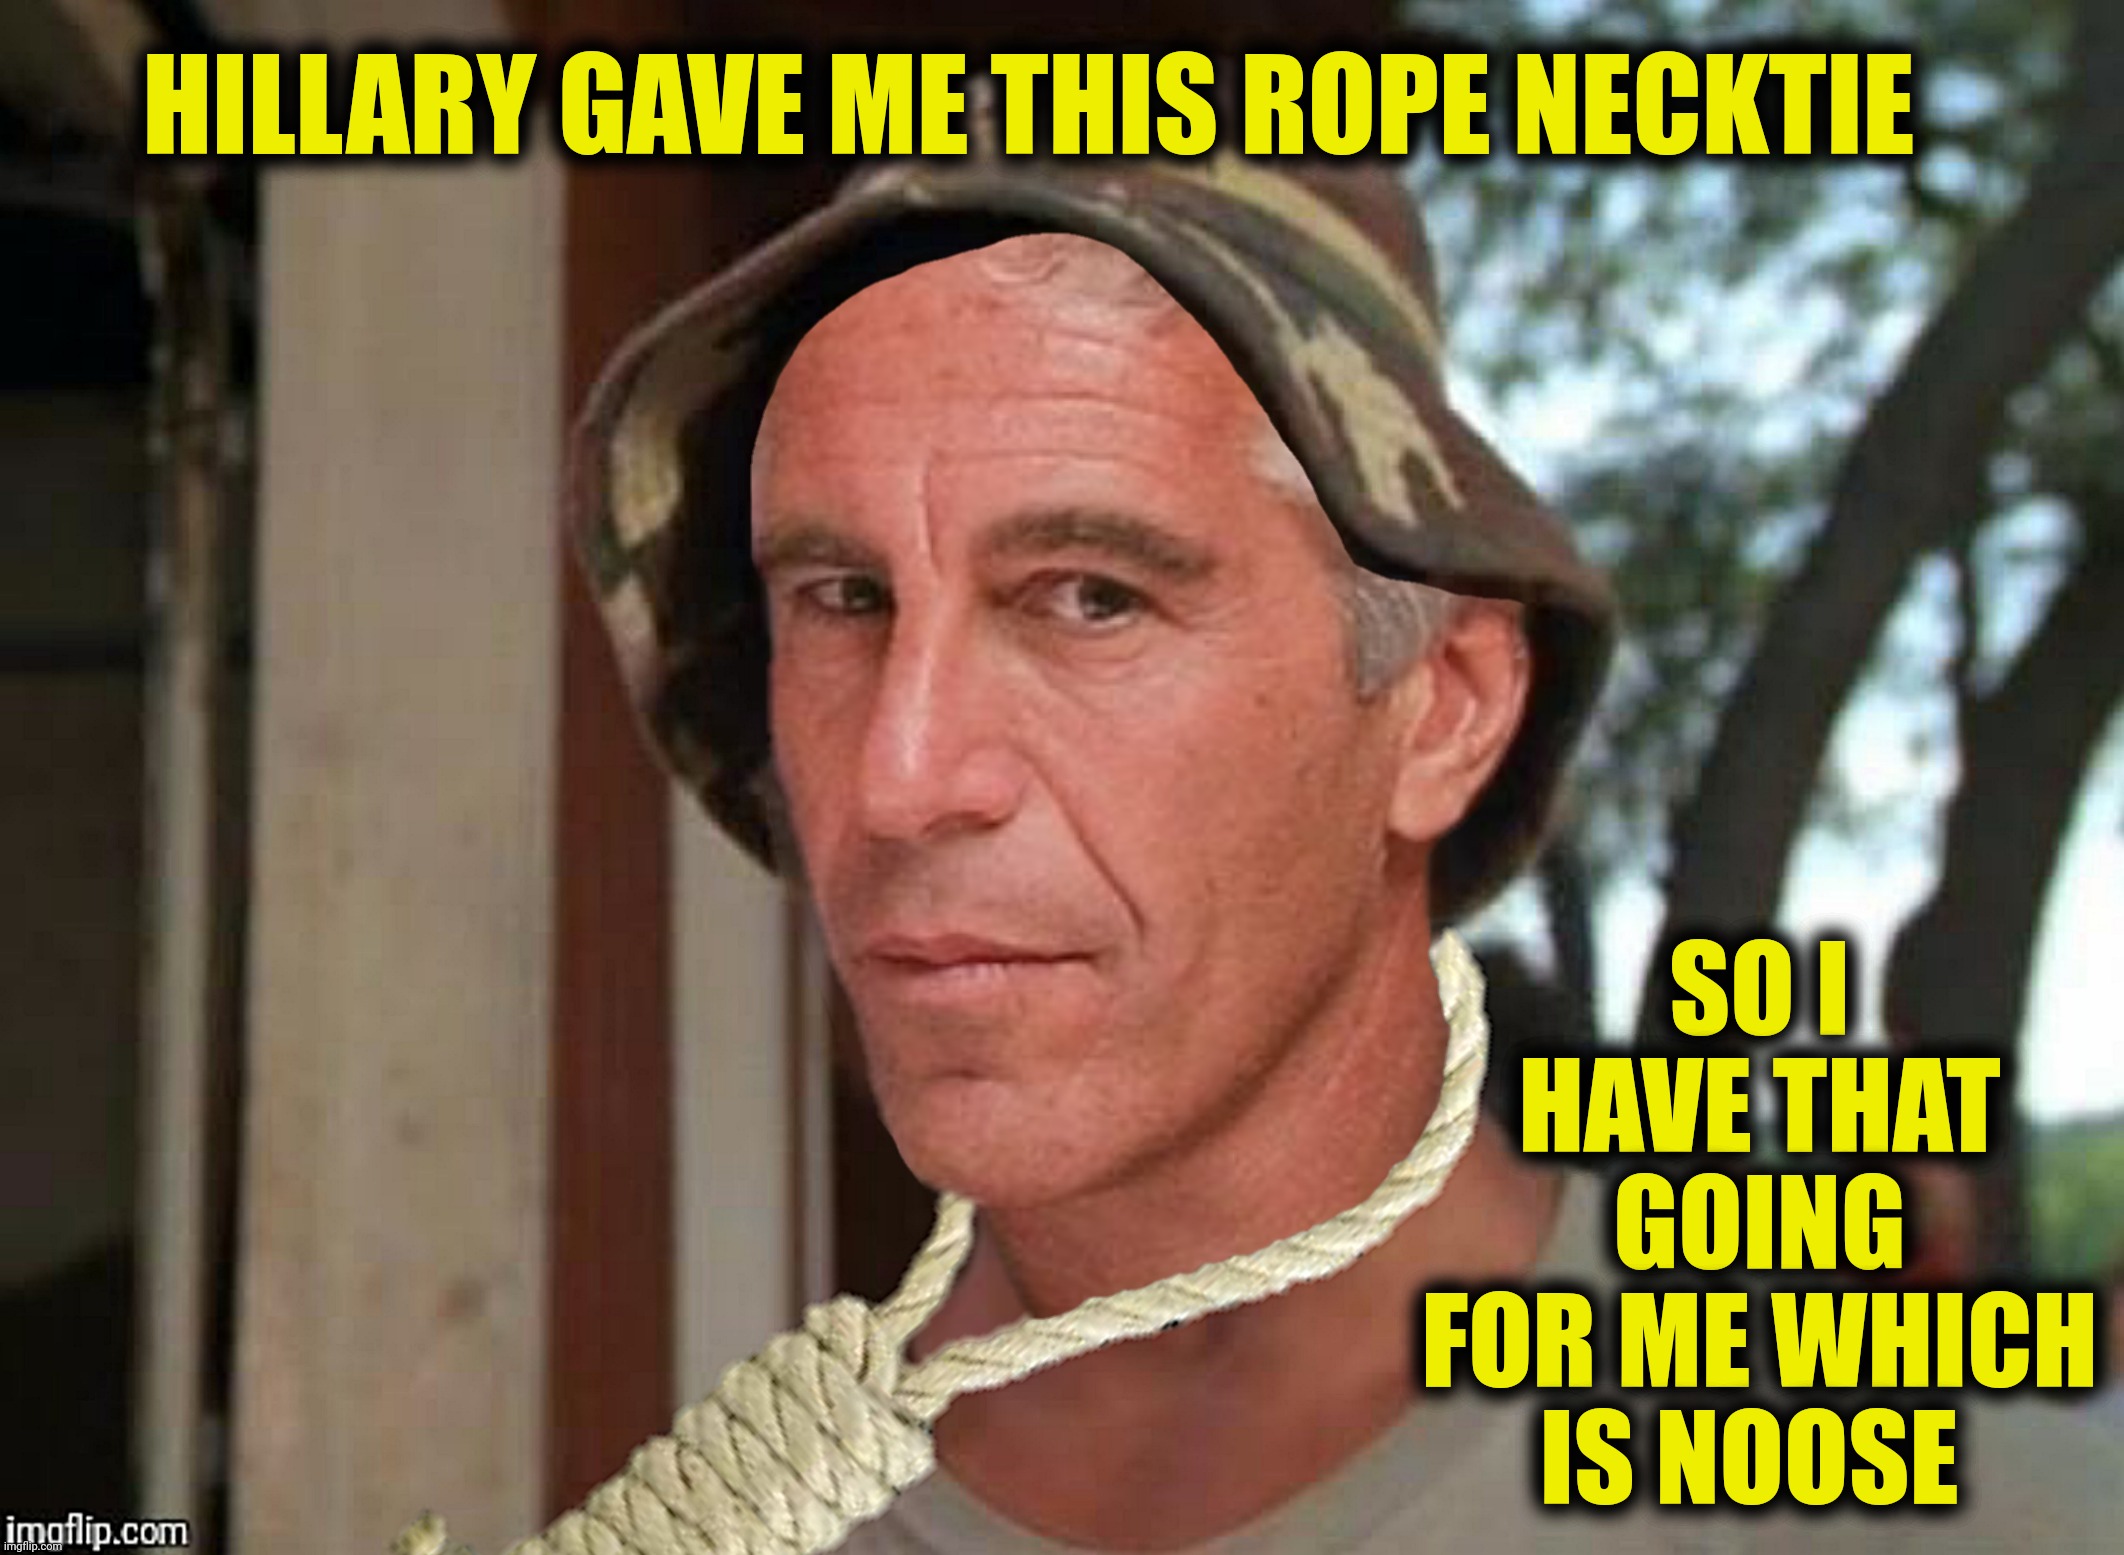 HILLARY GAVE ME THIS ROPE NECKTIE SO I HAVE THAT GOING FOR ME WHICH IS NOOSE | made w/ Imgflip meme maker